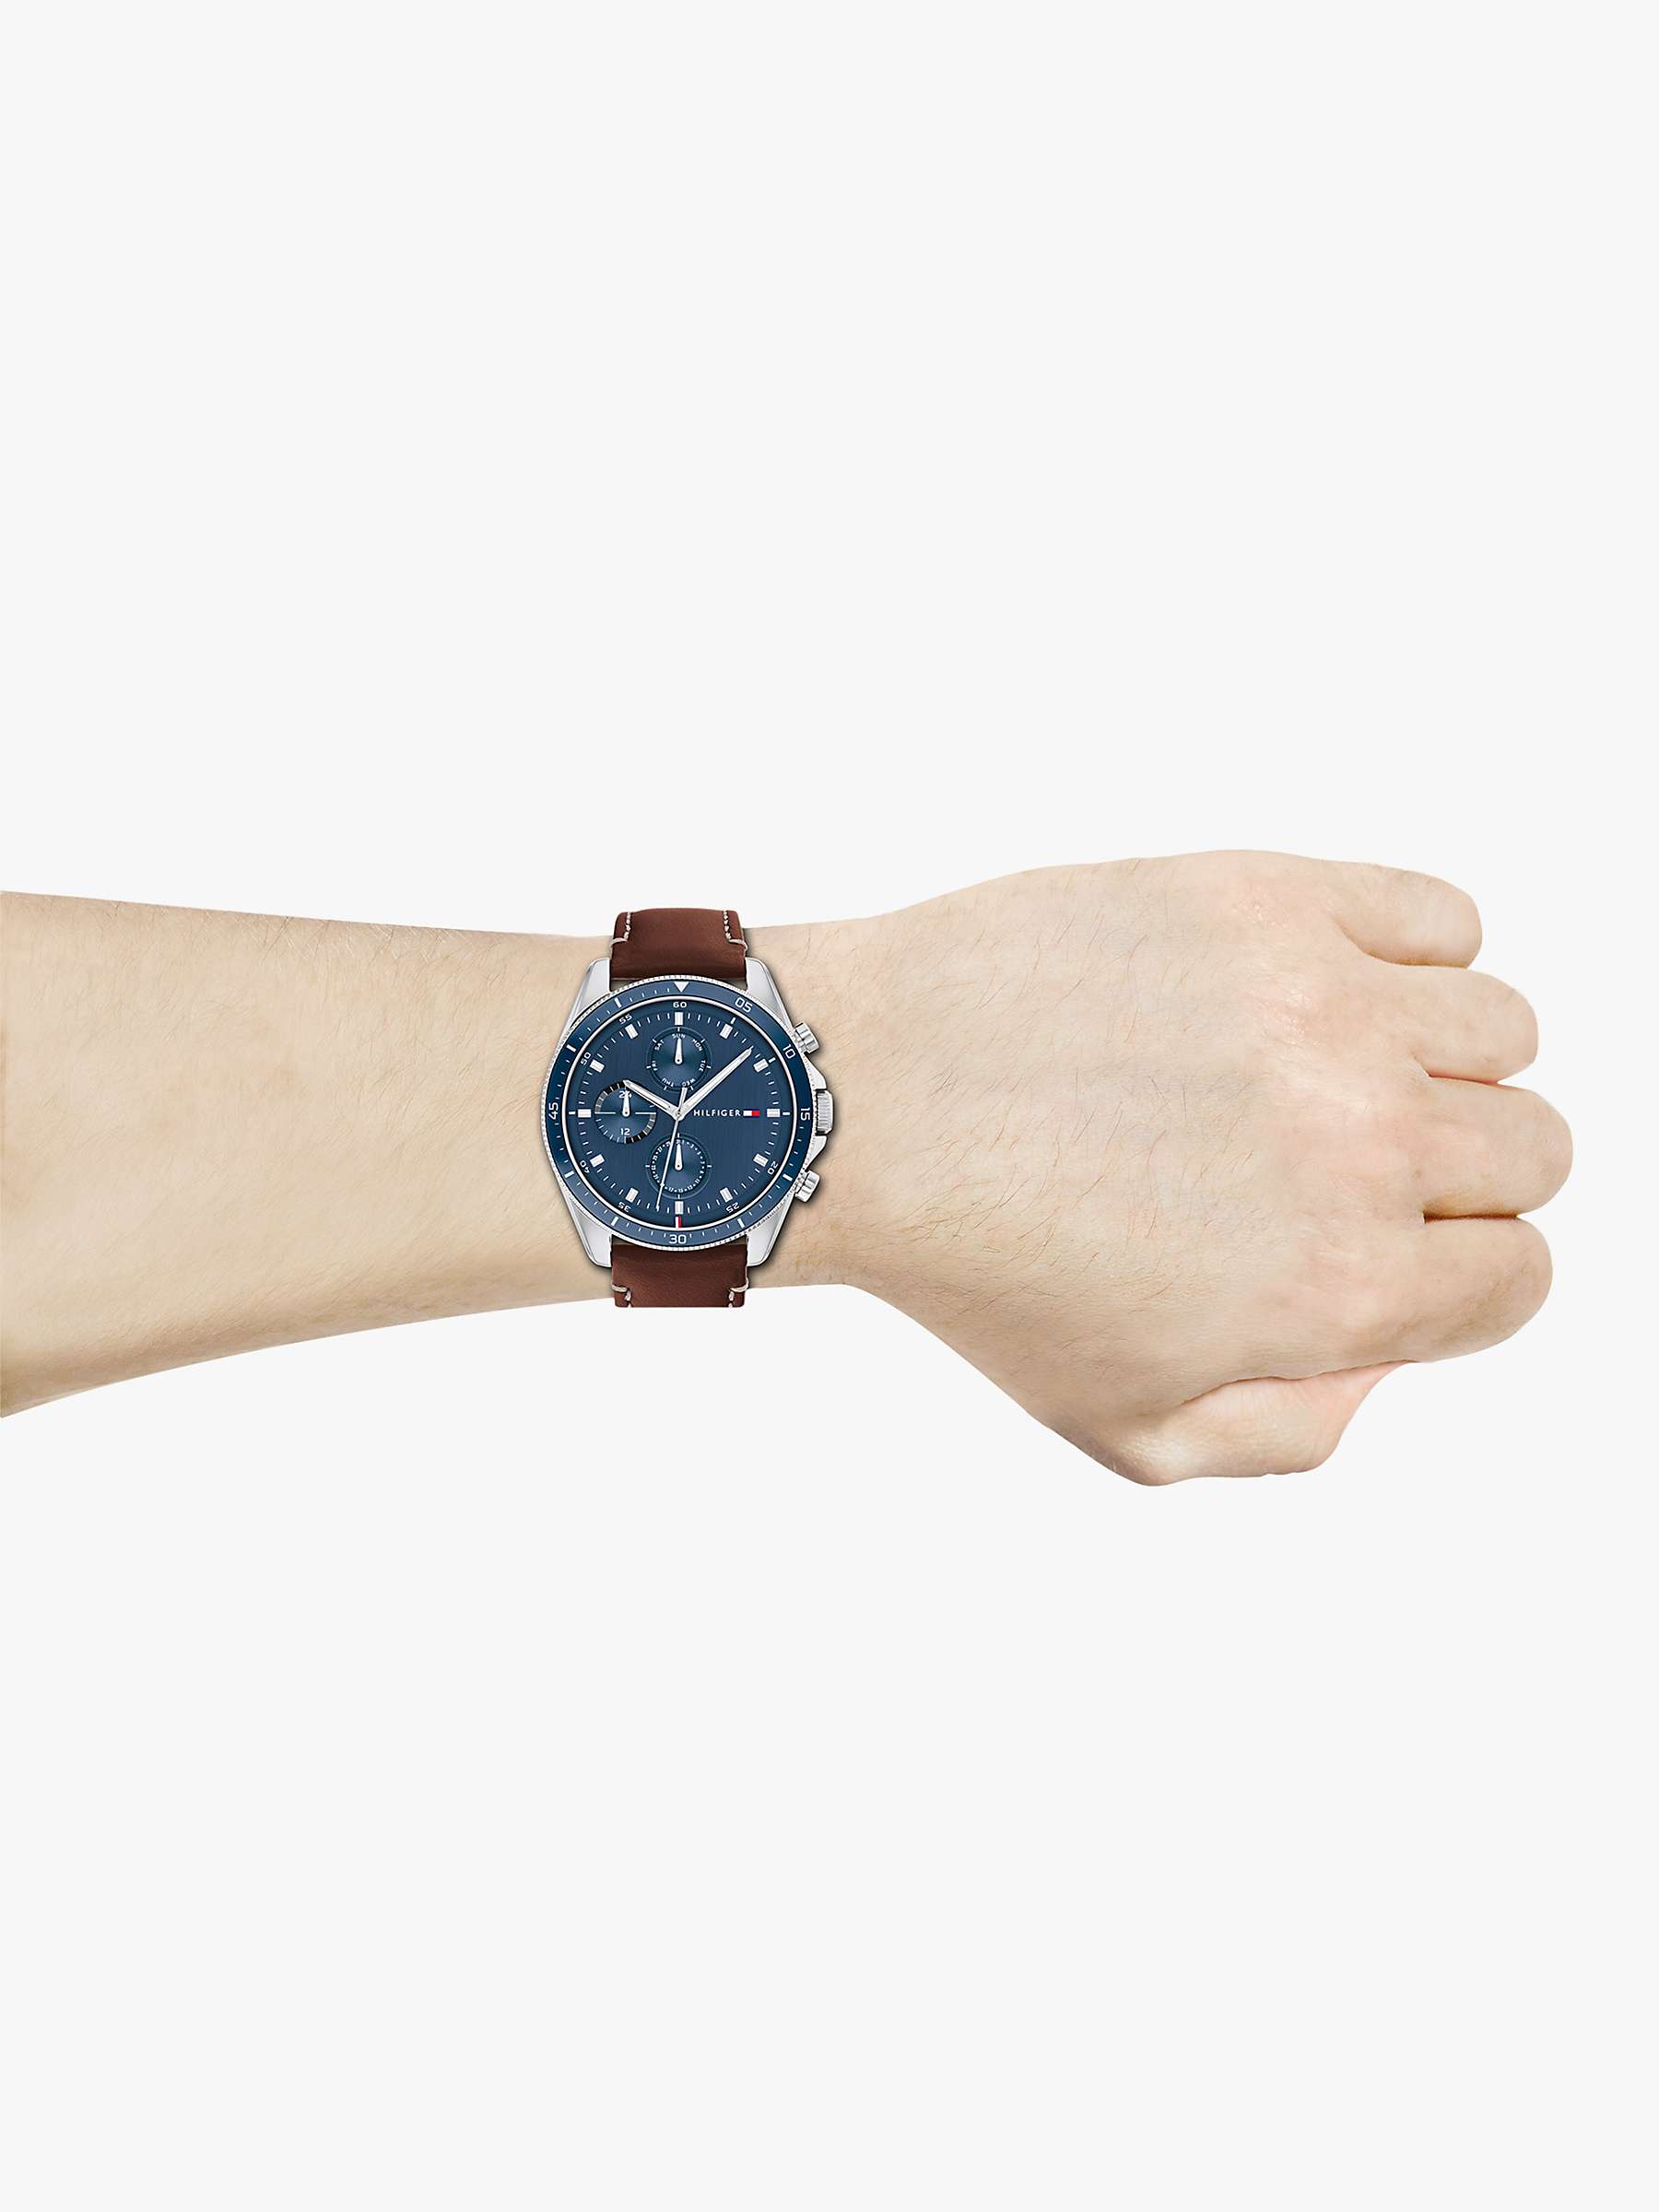 Buy Tommy Hilfiger Men's Chronograph Leather Strap Watch Online at johnlewis.com